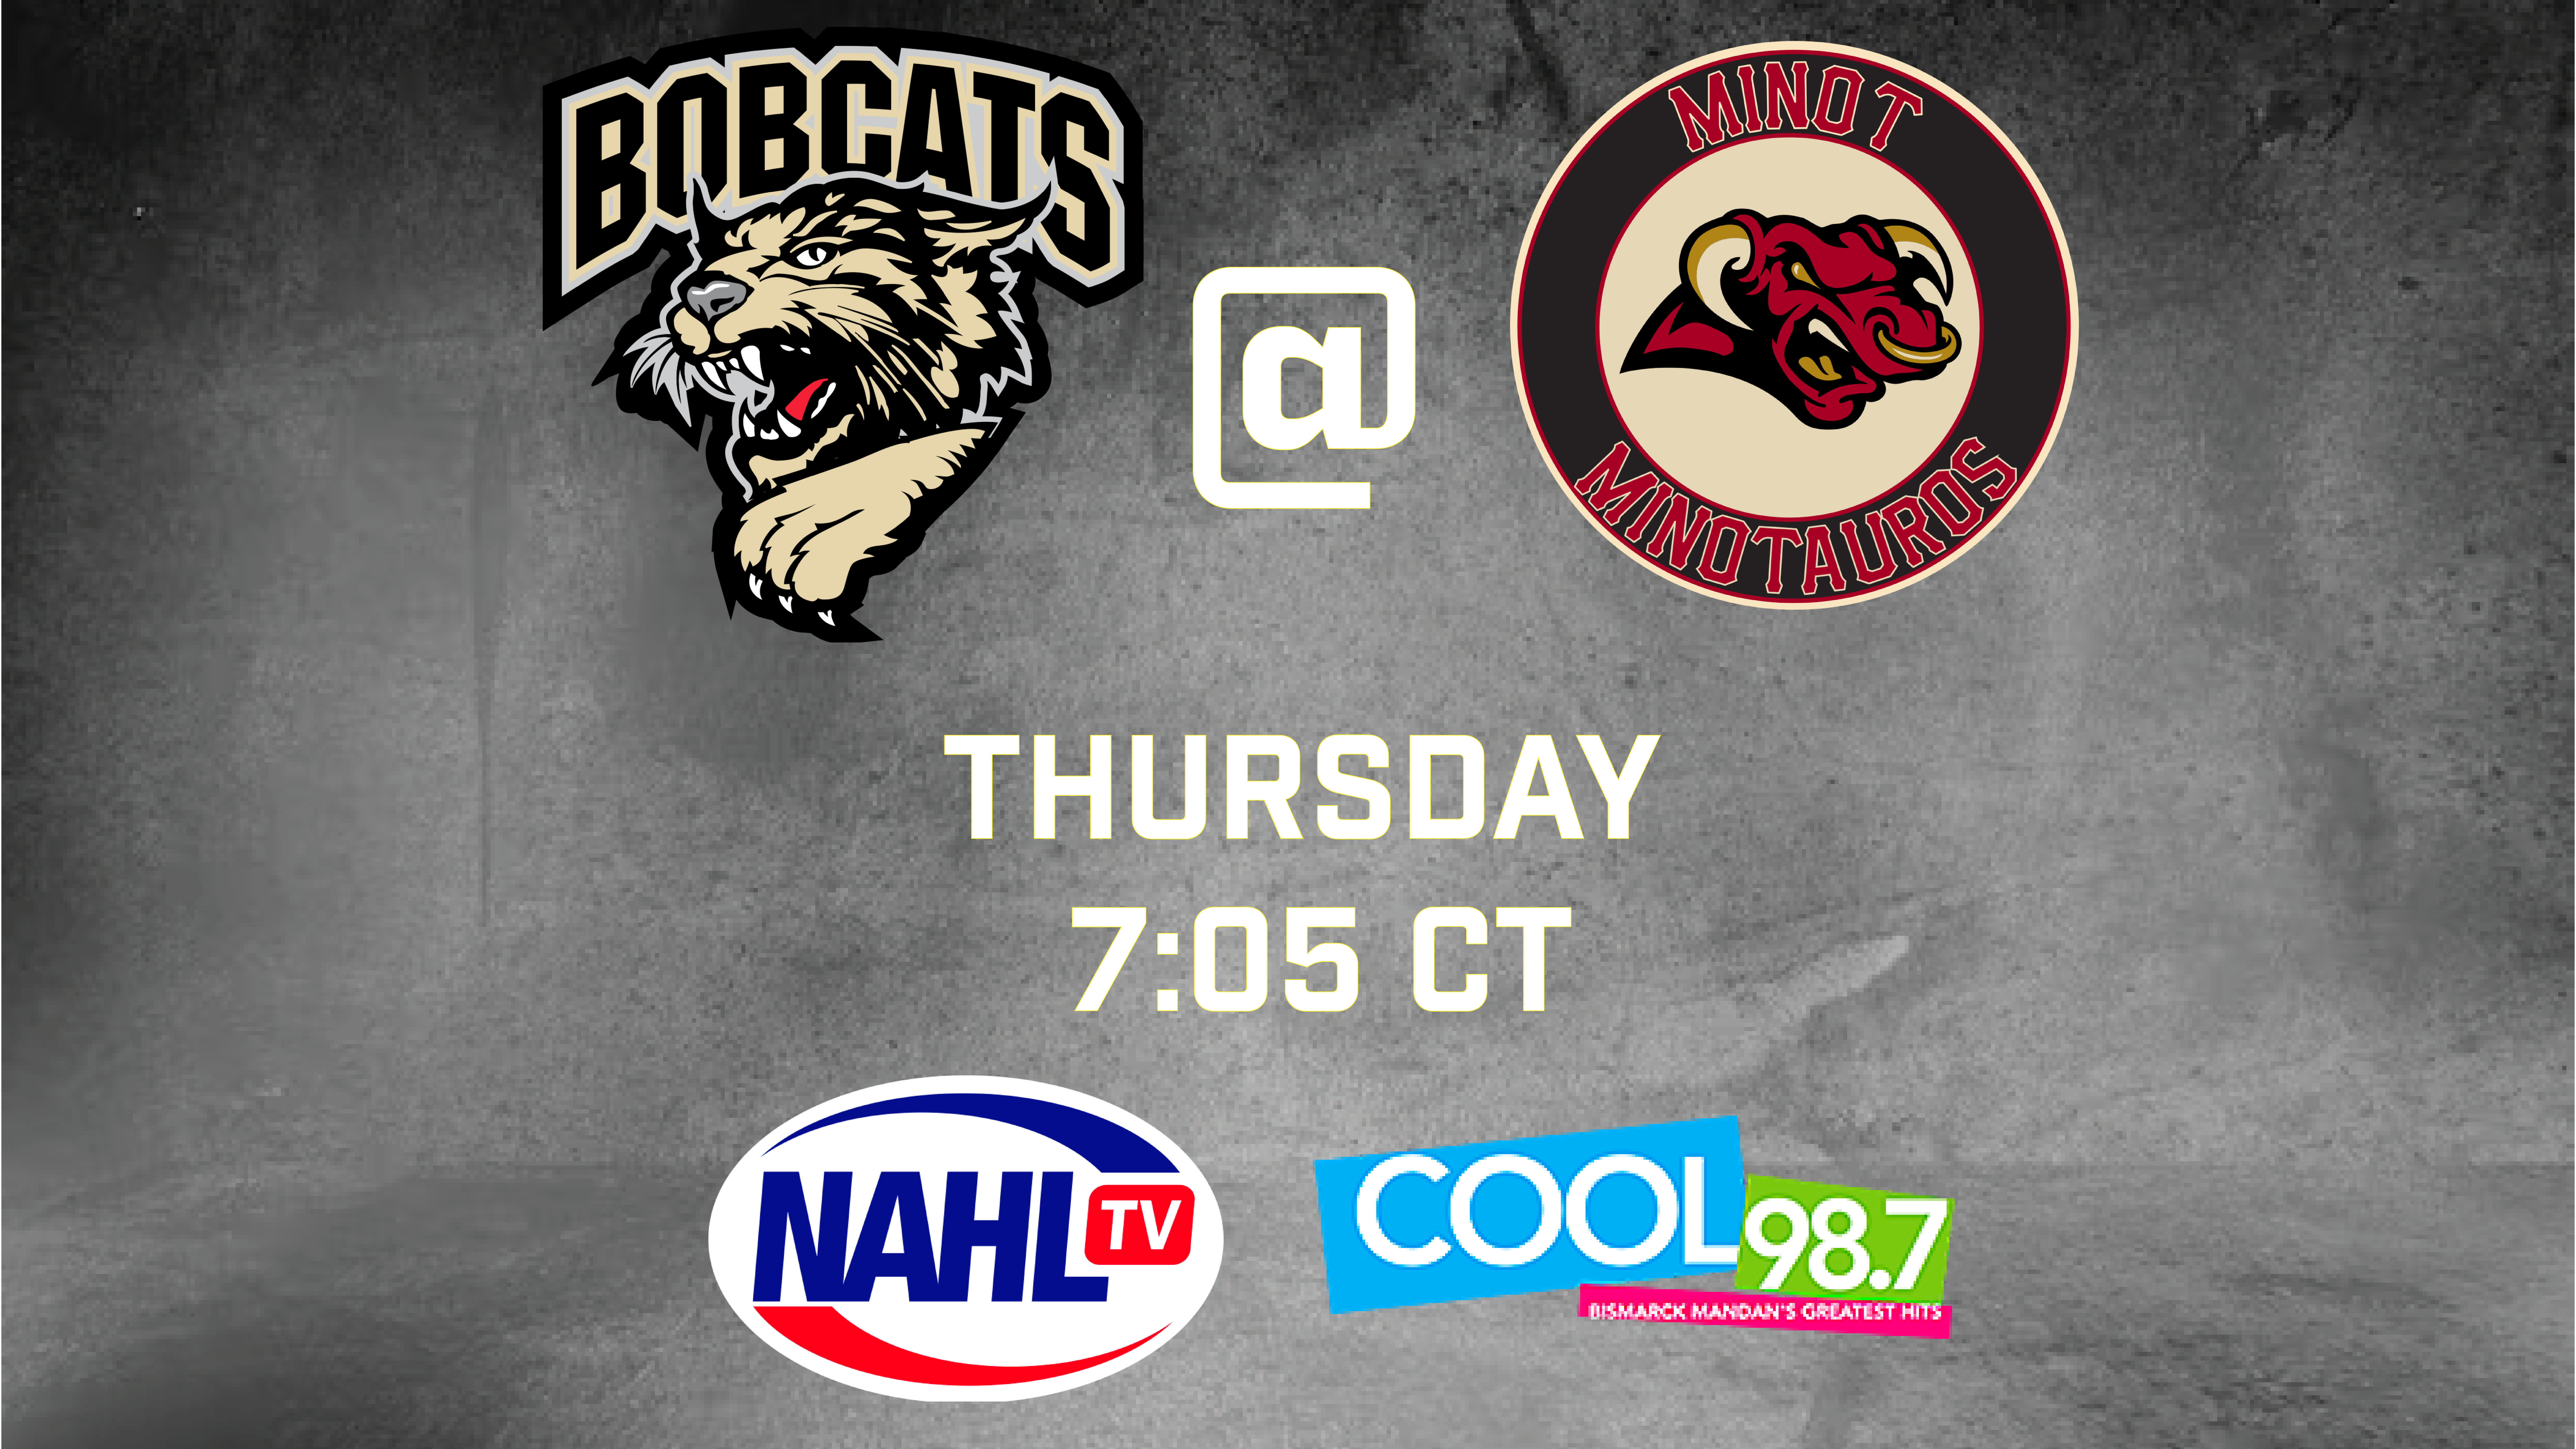 Bobcats to play 3 games in 3 nights